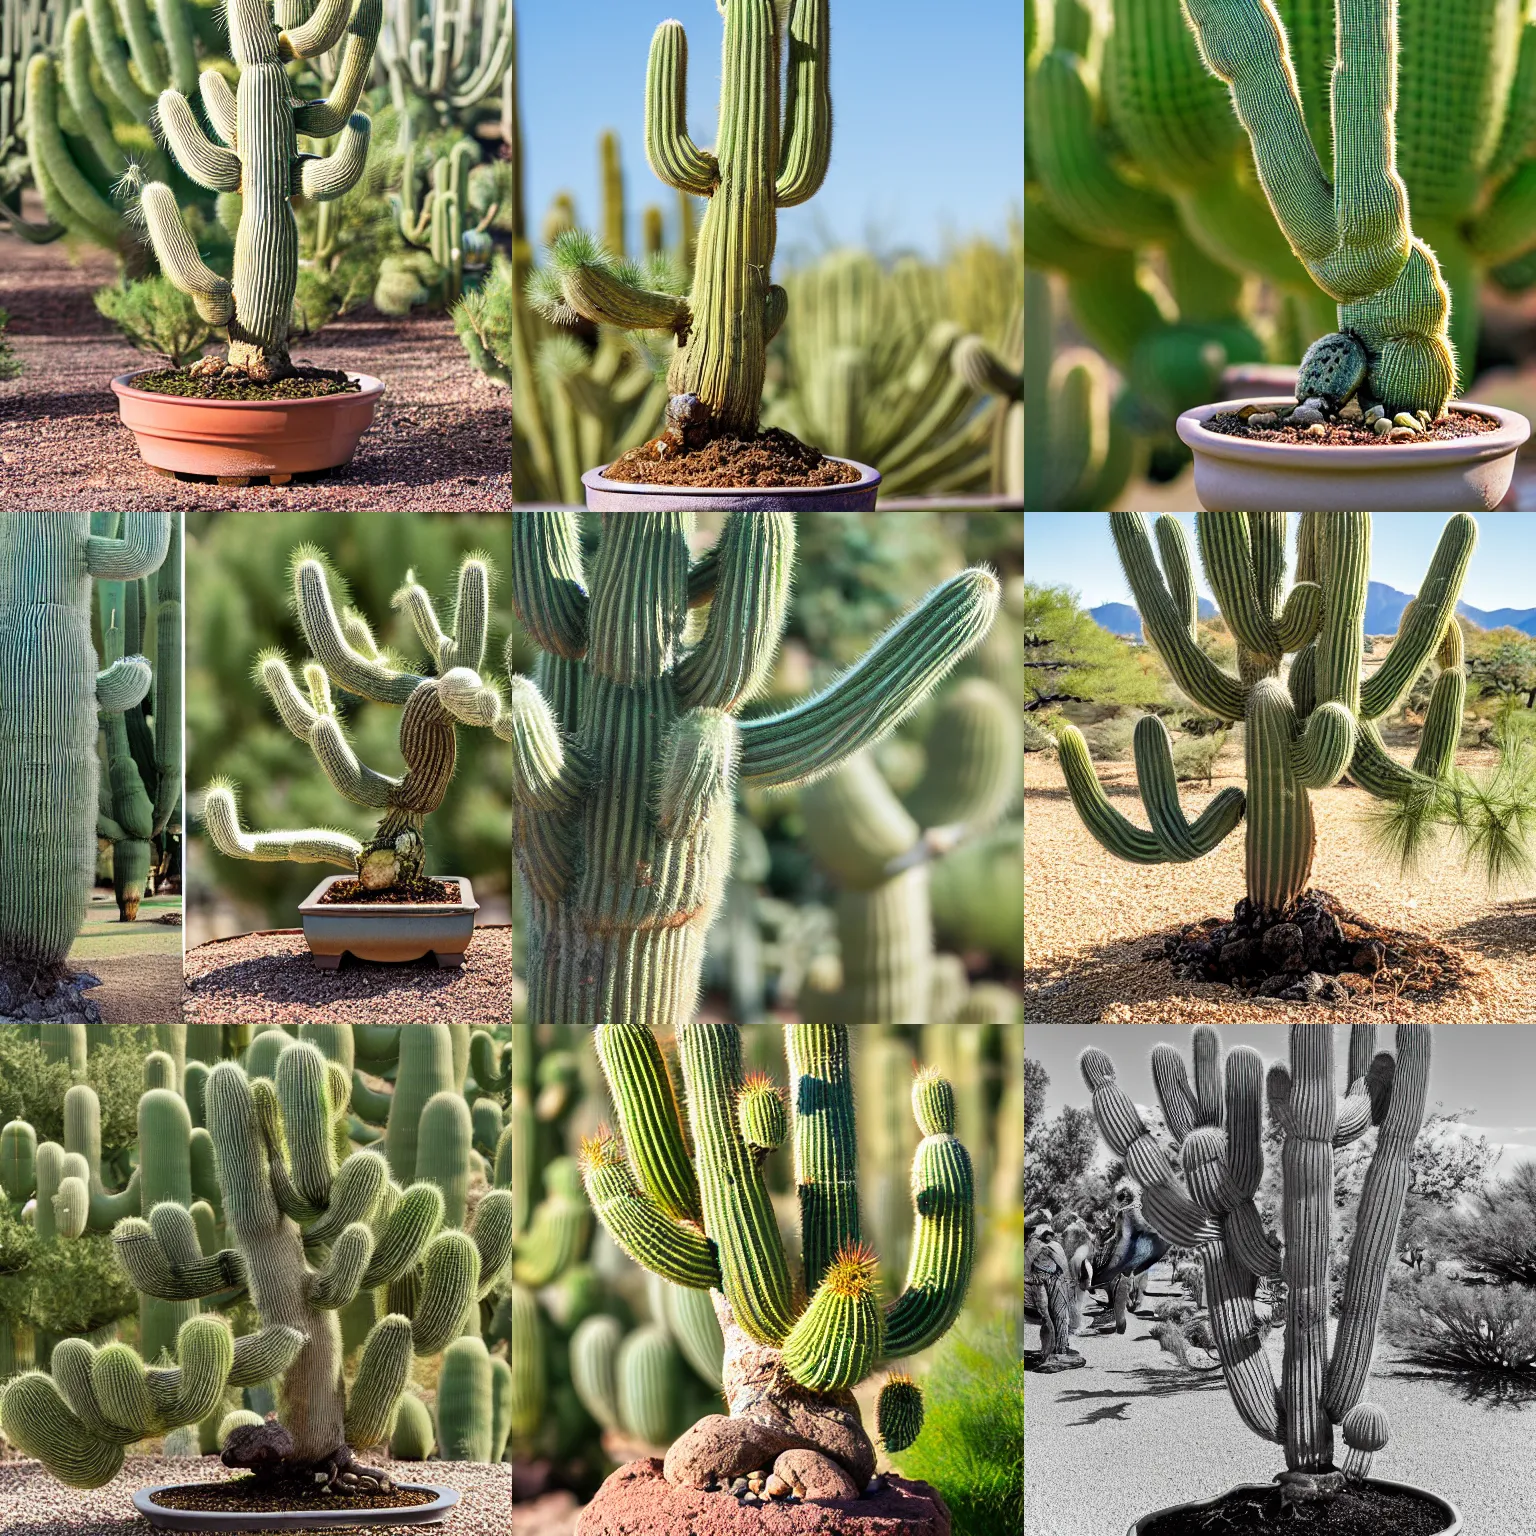 Prompt: Bonsai saguaro cactus in training since 1834, photograph from the national arboretum, Canon EOS R3, f/1.4, ISO 200, 1/160s, 8K